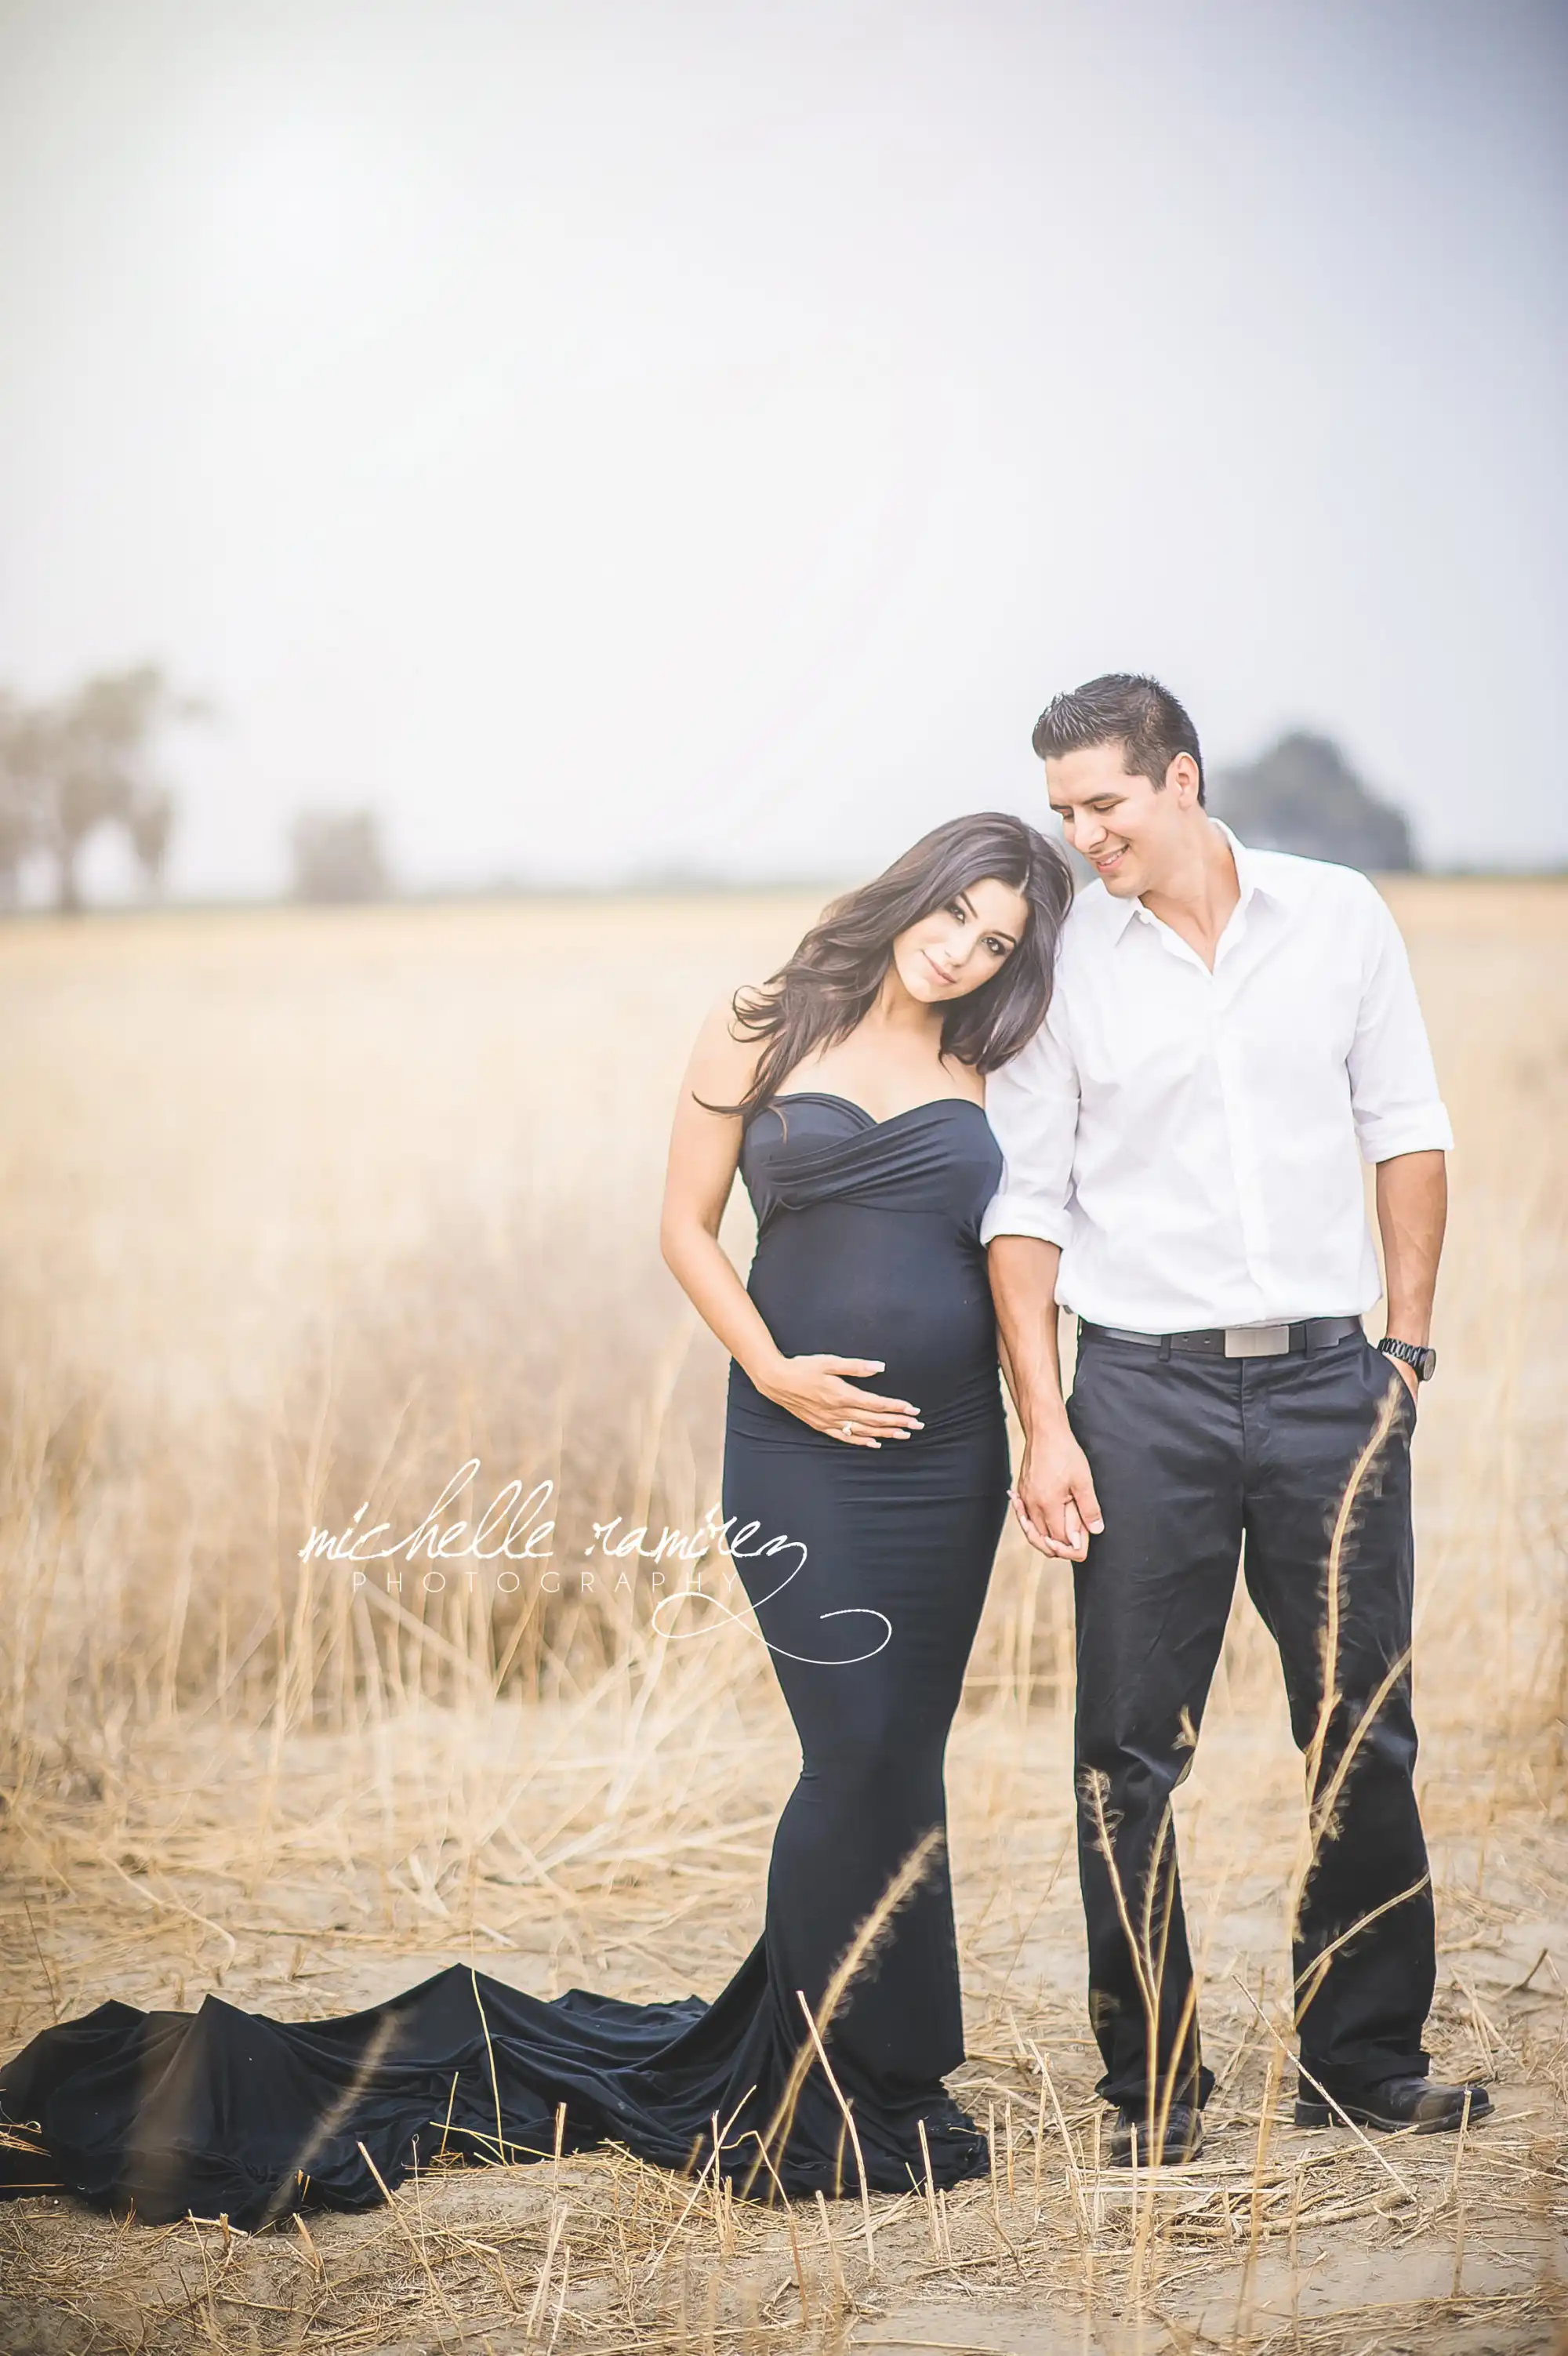 Essential Tips for Preparing Your Pregnant Client for Her Photo Shoot